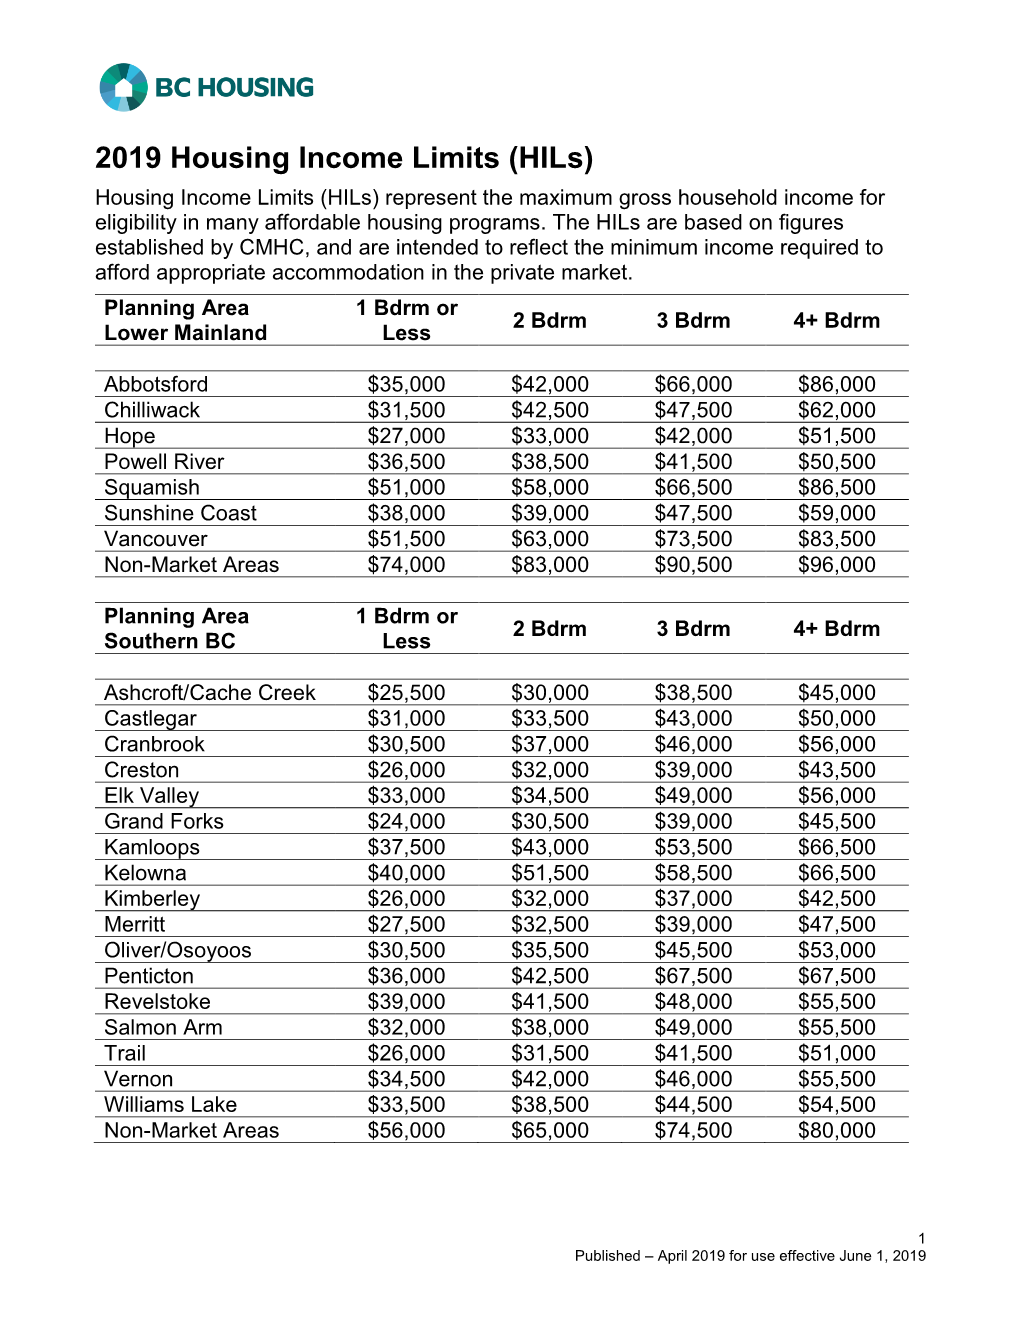 Housing Income Limits (Hils) Housing Income Limits (Hils) Represent the Maximum Gross Household Income for Eligibility in Many Affordable Housing Programs